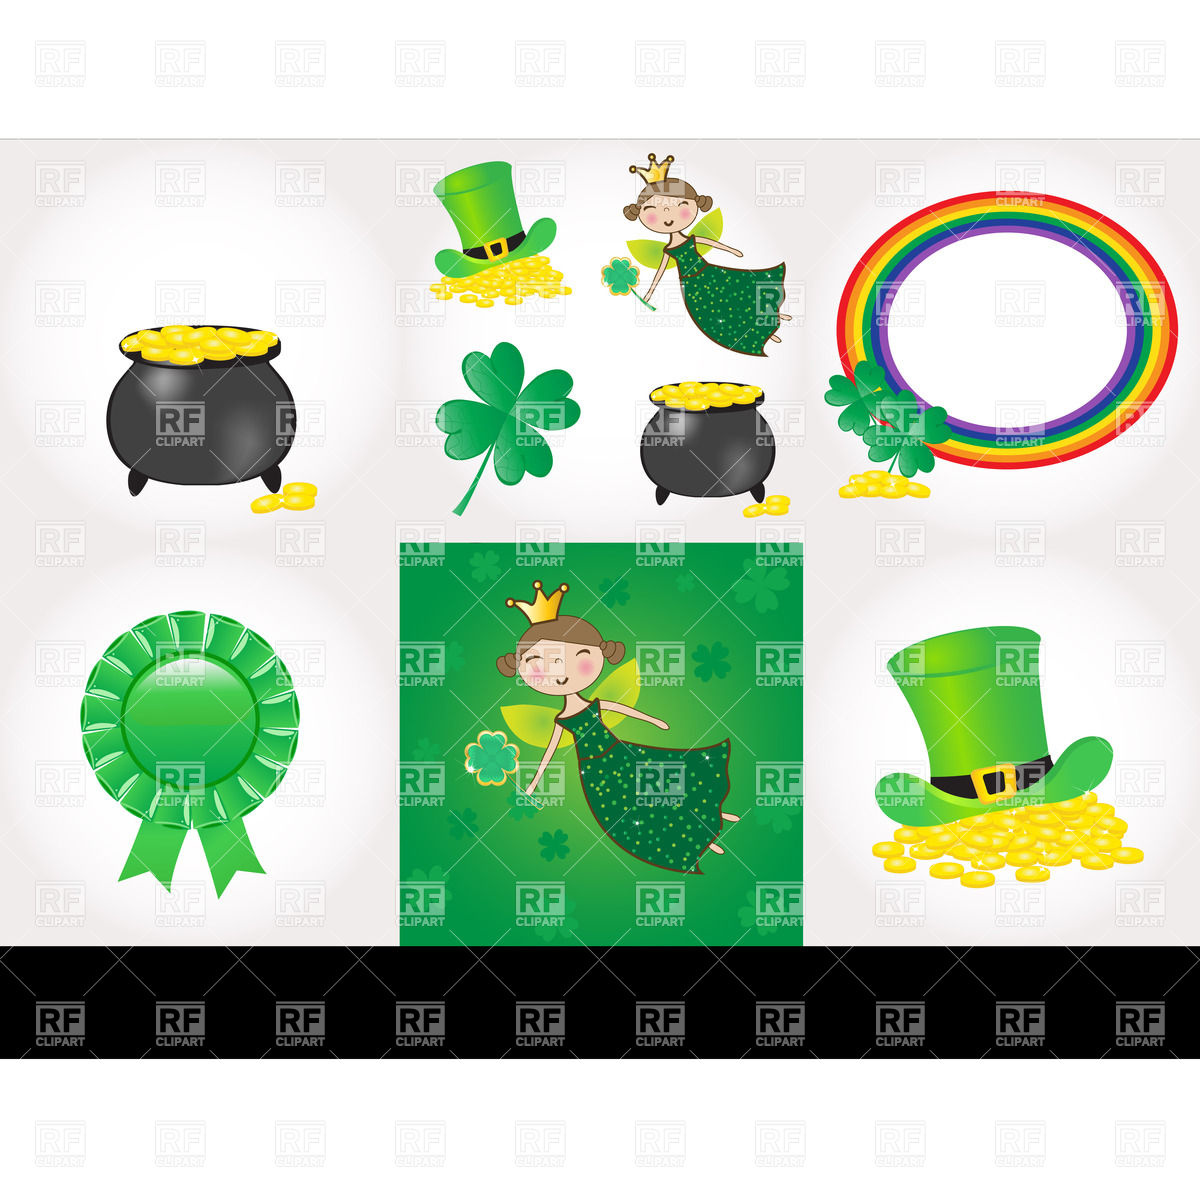 St  Patrick S Day Symbols   Pot Of Gold Fairy And Other Elements    